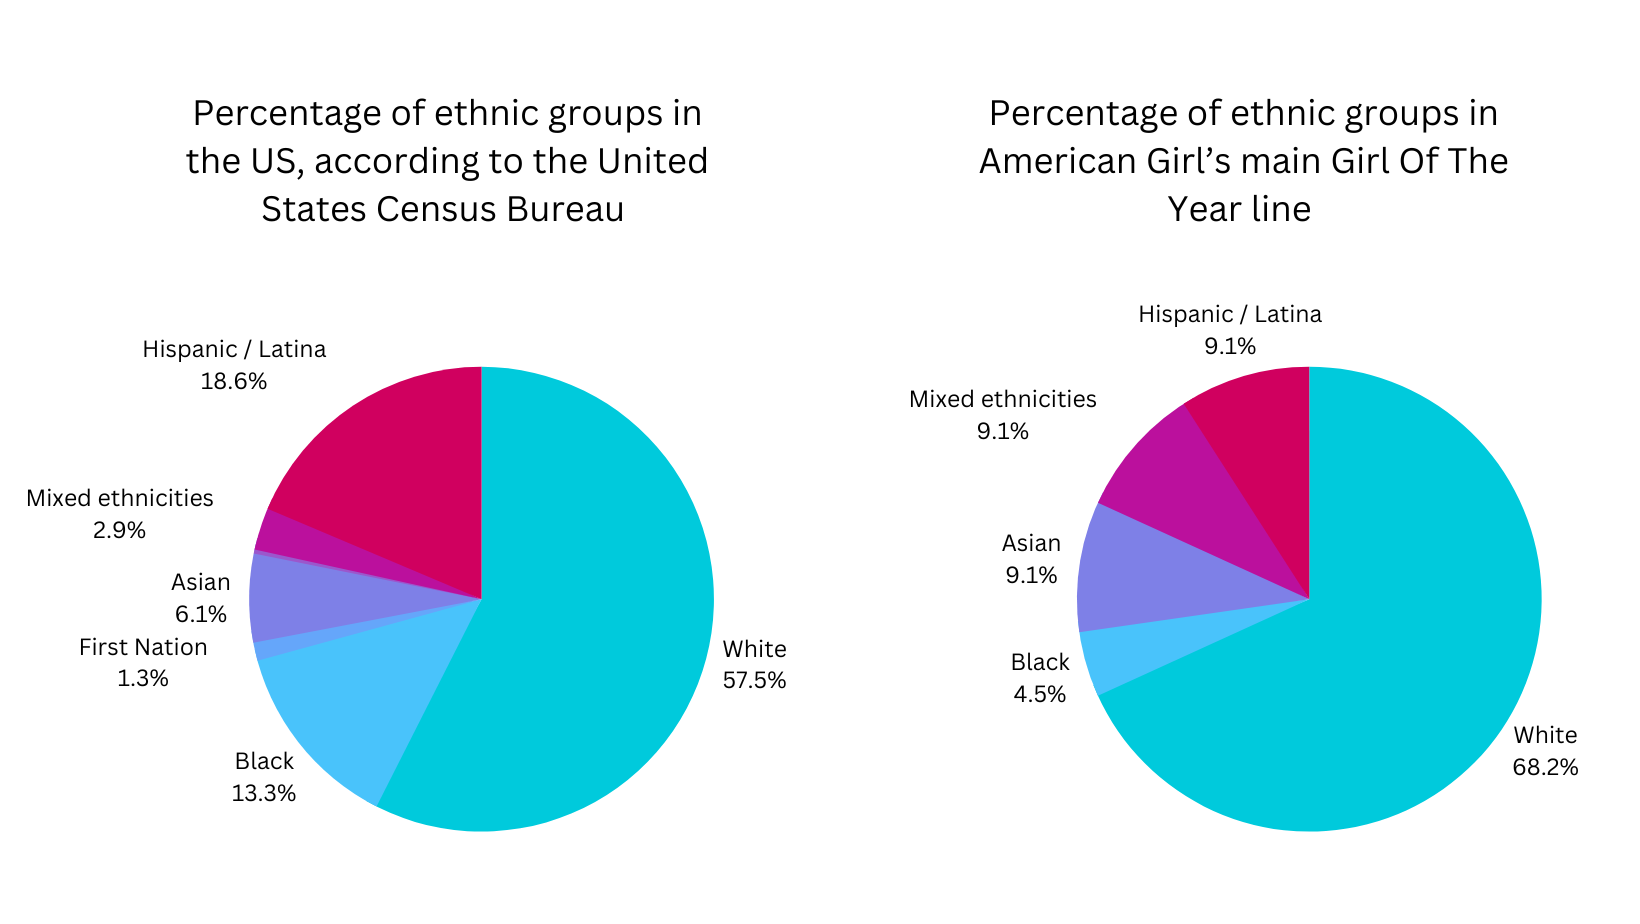 Ethnic groups in the US, according to the United States Census Bureau compared to ethnic groups in the main American Girl's Girl of the Year line. Image by Empoword. 